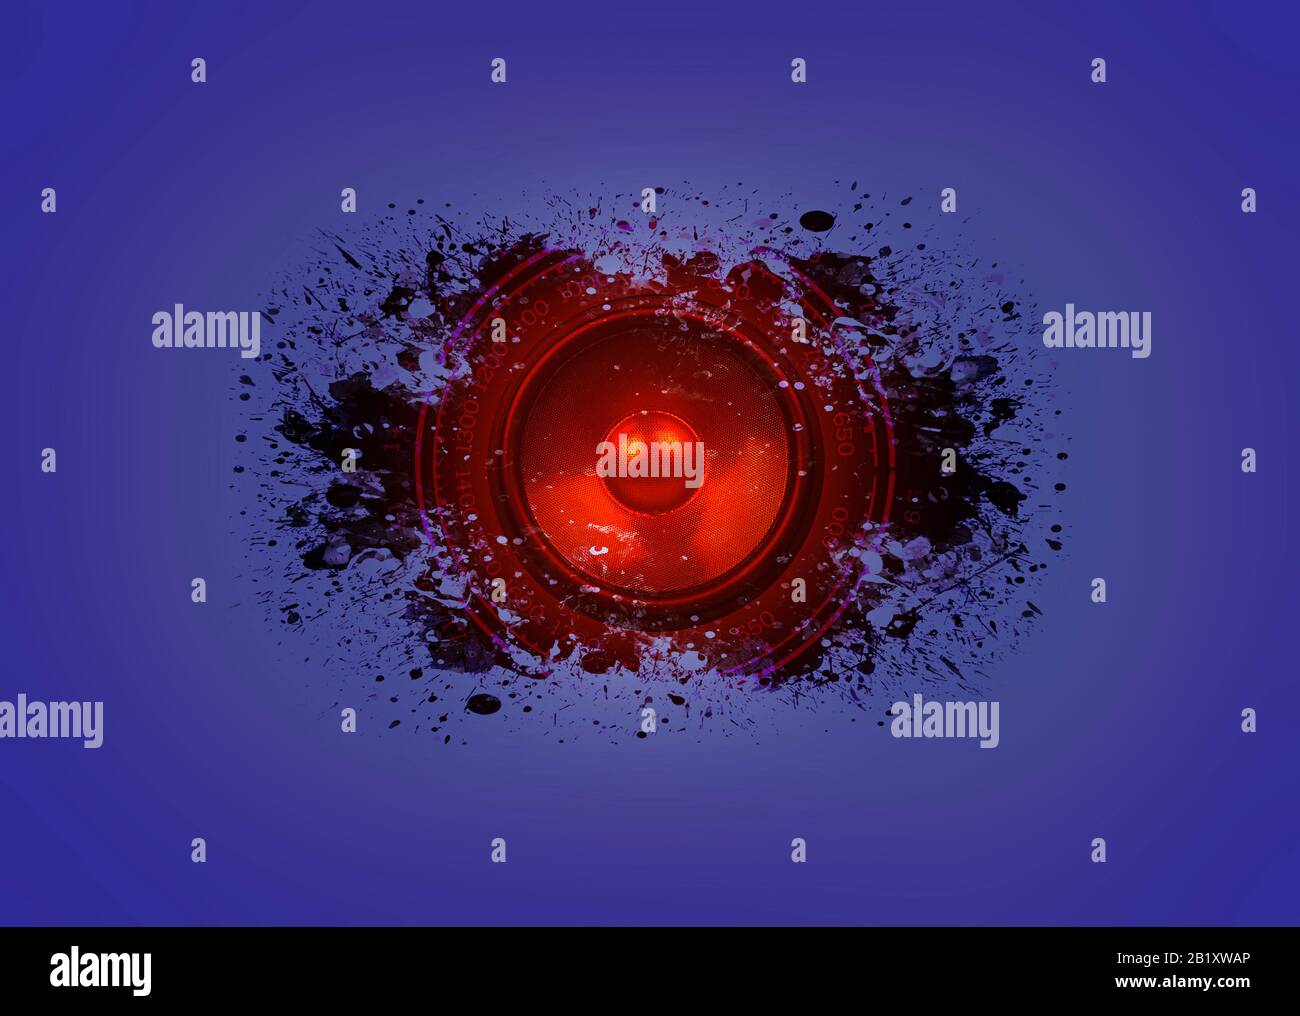 Red music speaker on a blue background with paint splashes Stock Photo